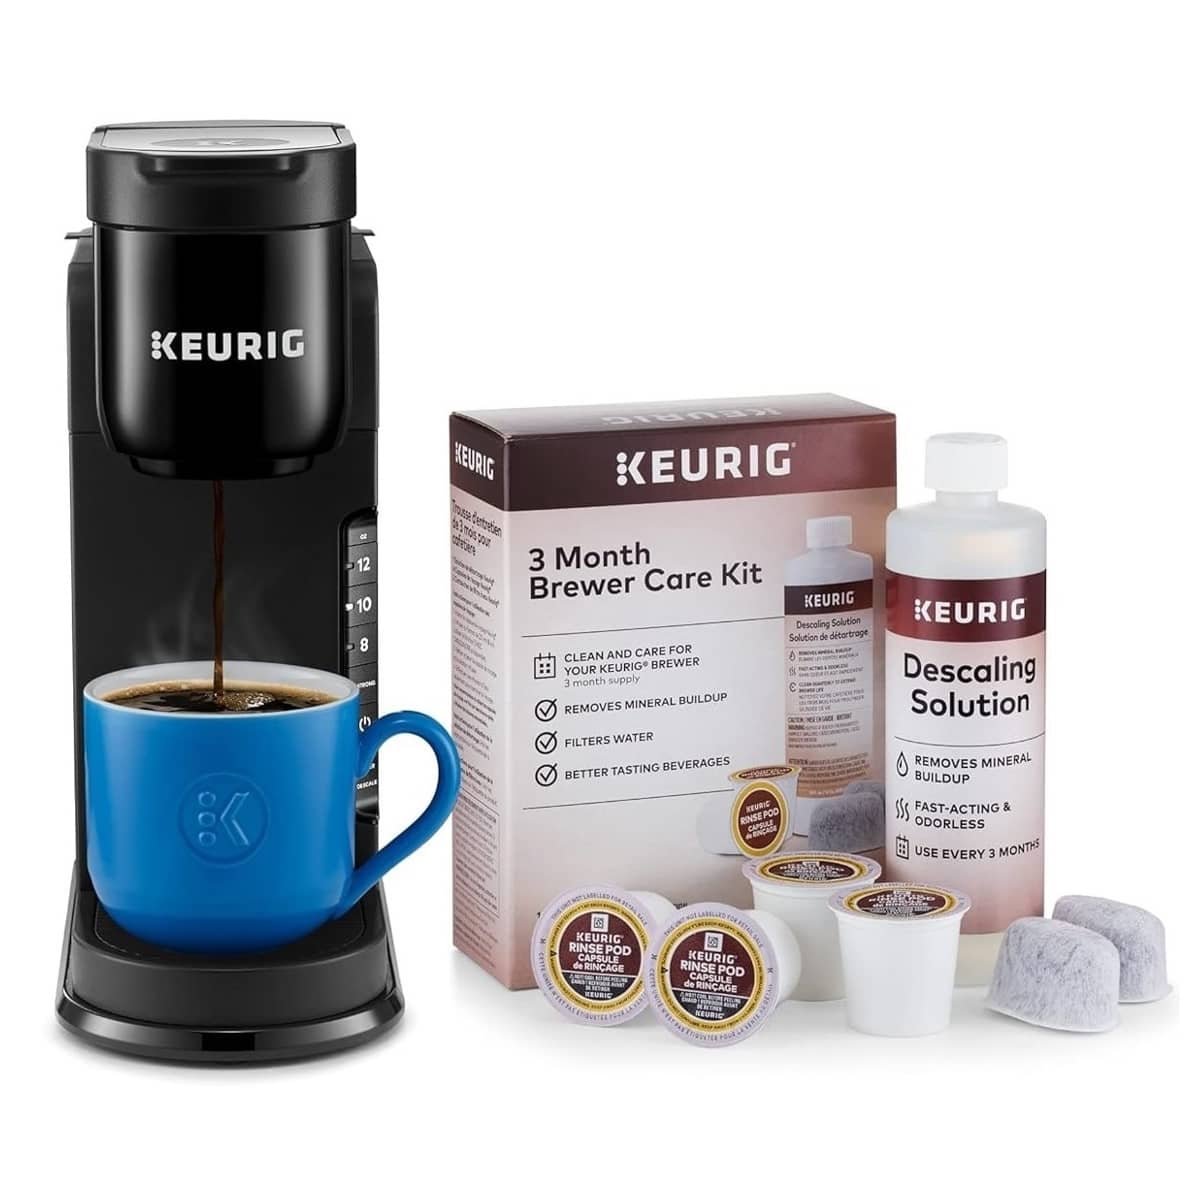 How to put Keurig in descale mode